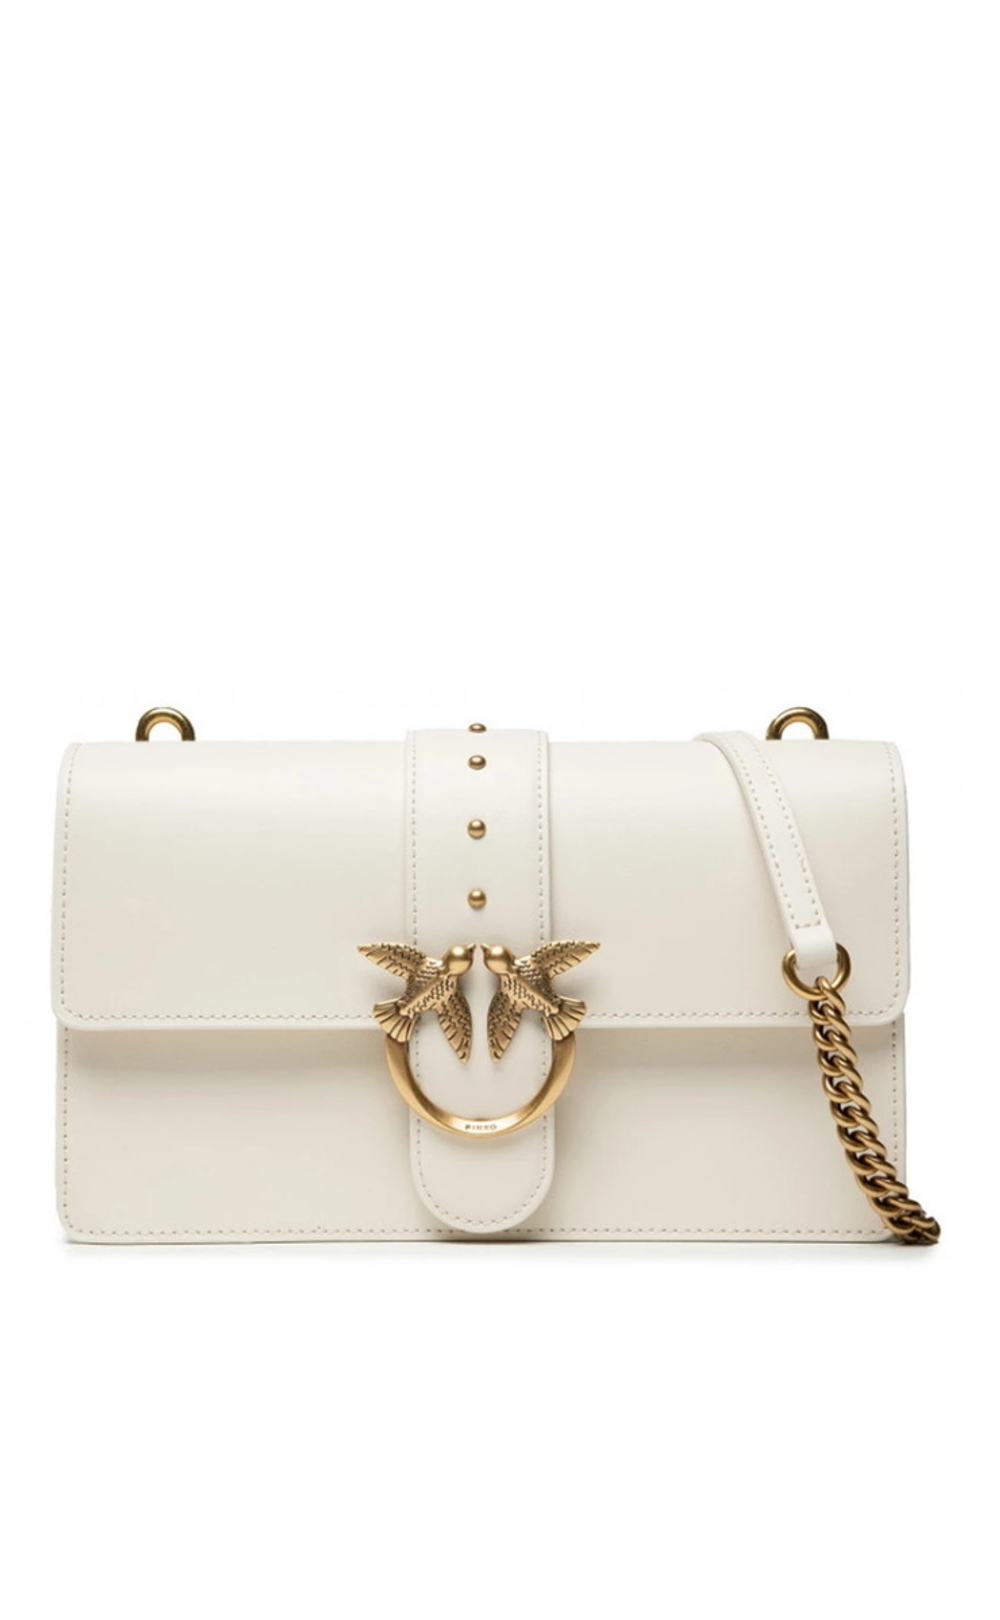 CLASSIC LOVE BAG SIMPLY – white/gold